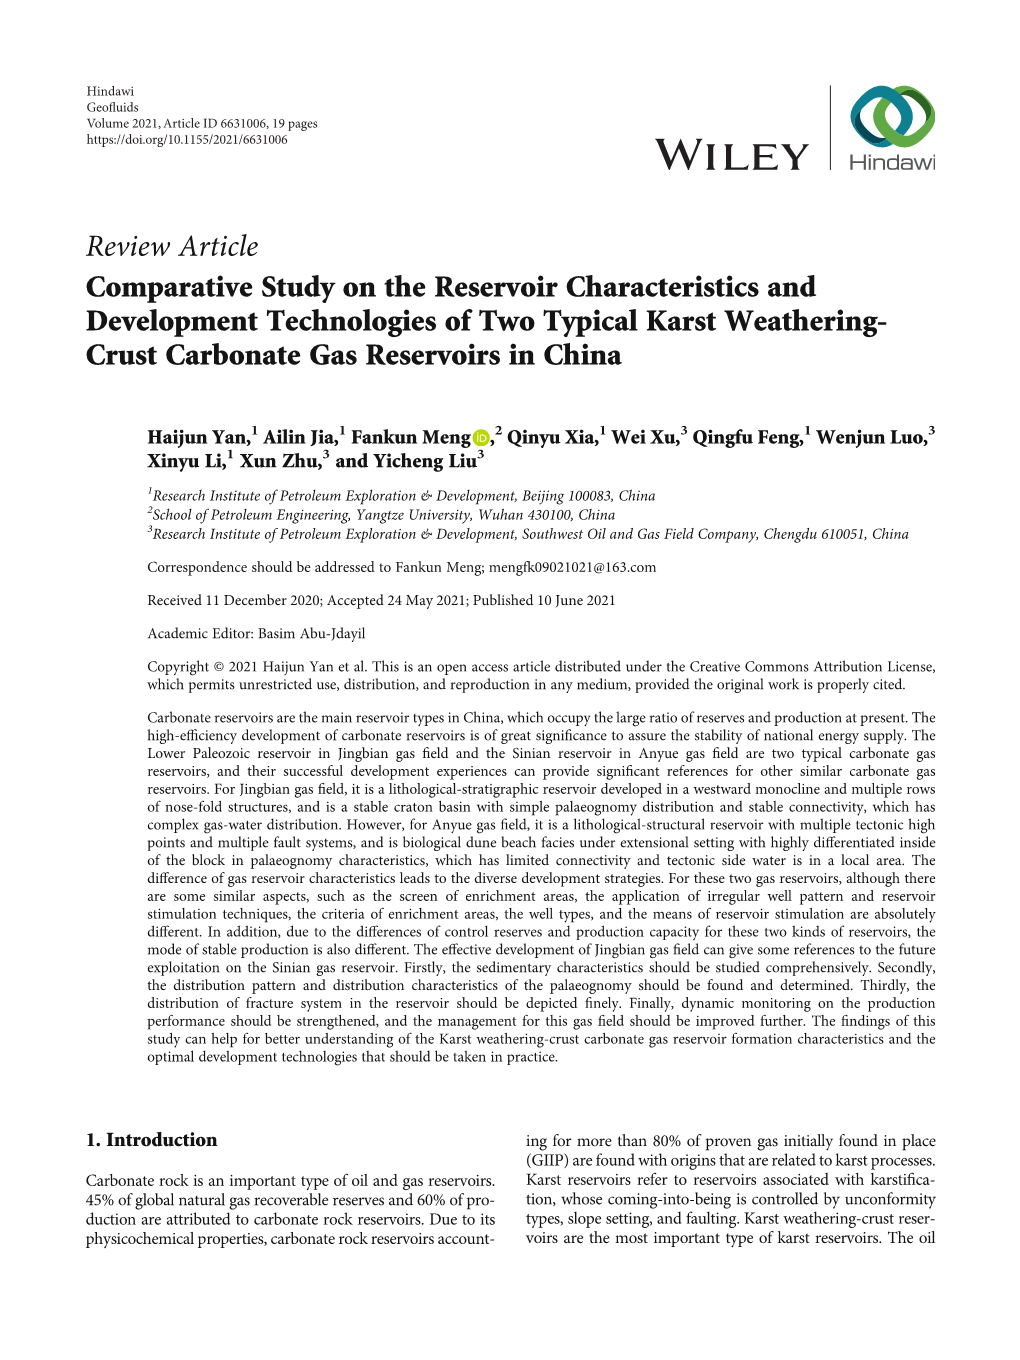 Comparative Study on the Reservoir Characteristics and Development Technologies of Two Typical Karst Weathering- Crust Carbonate Gas Reservoirs in China